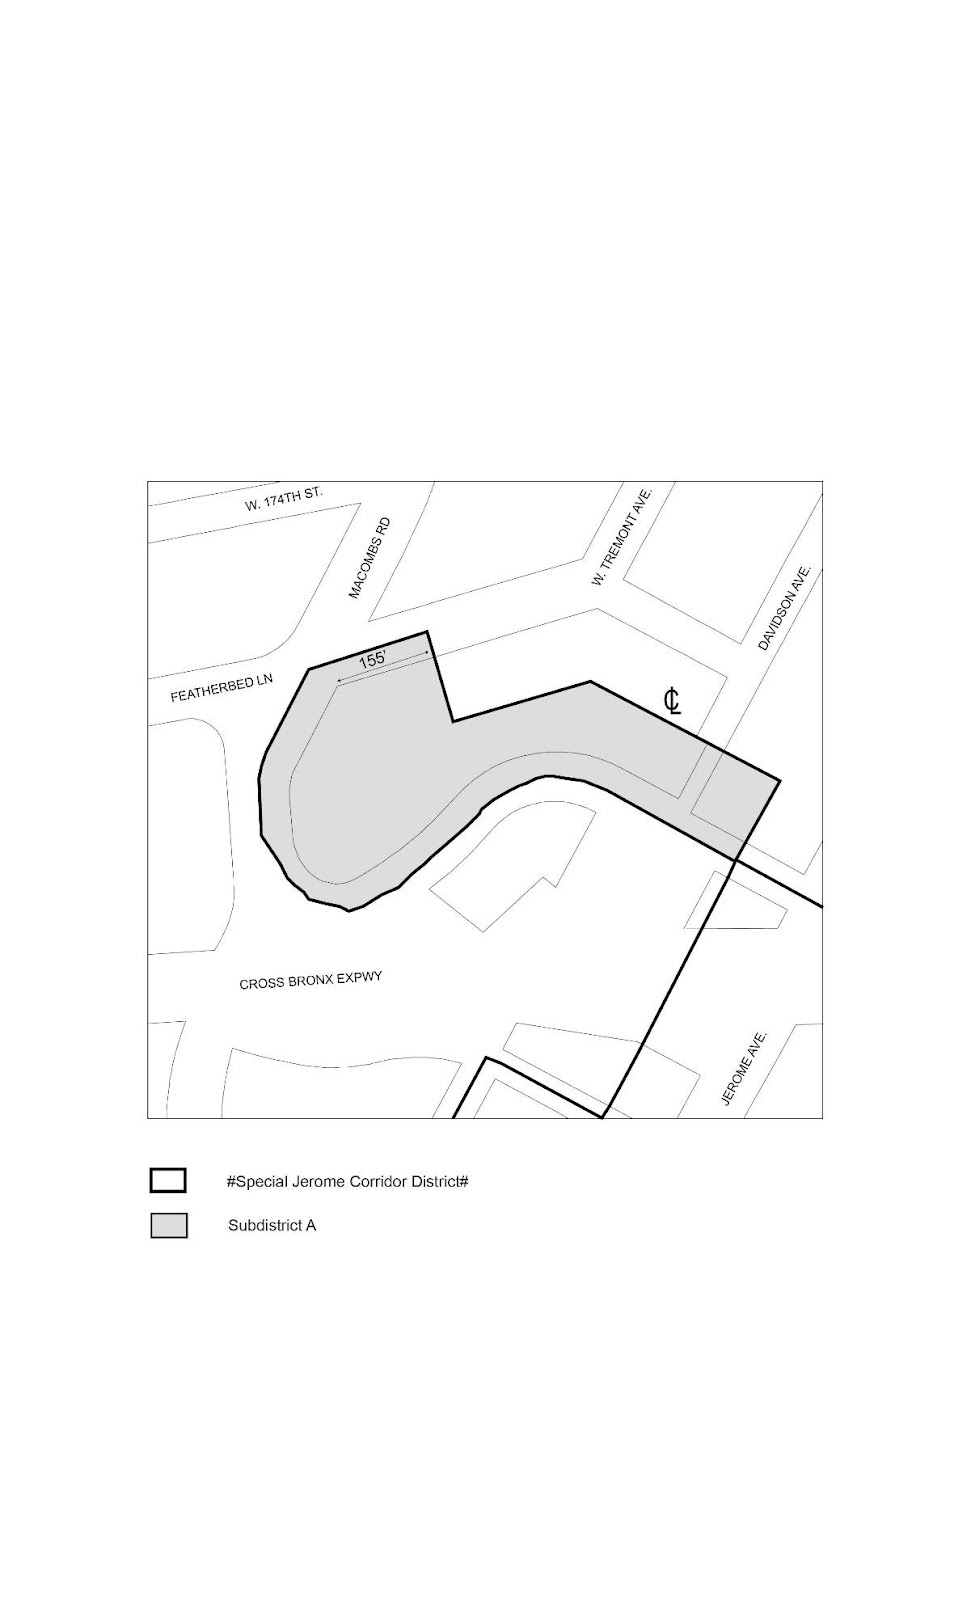 Zoning Resolutions Chapter 1: Special Jerome Corridor District APPENDIX.4